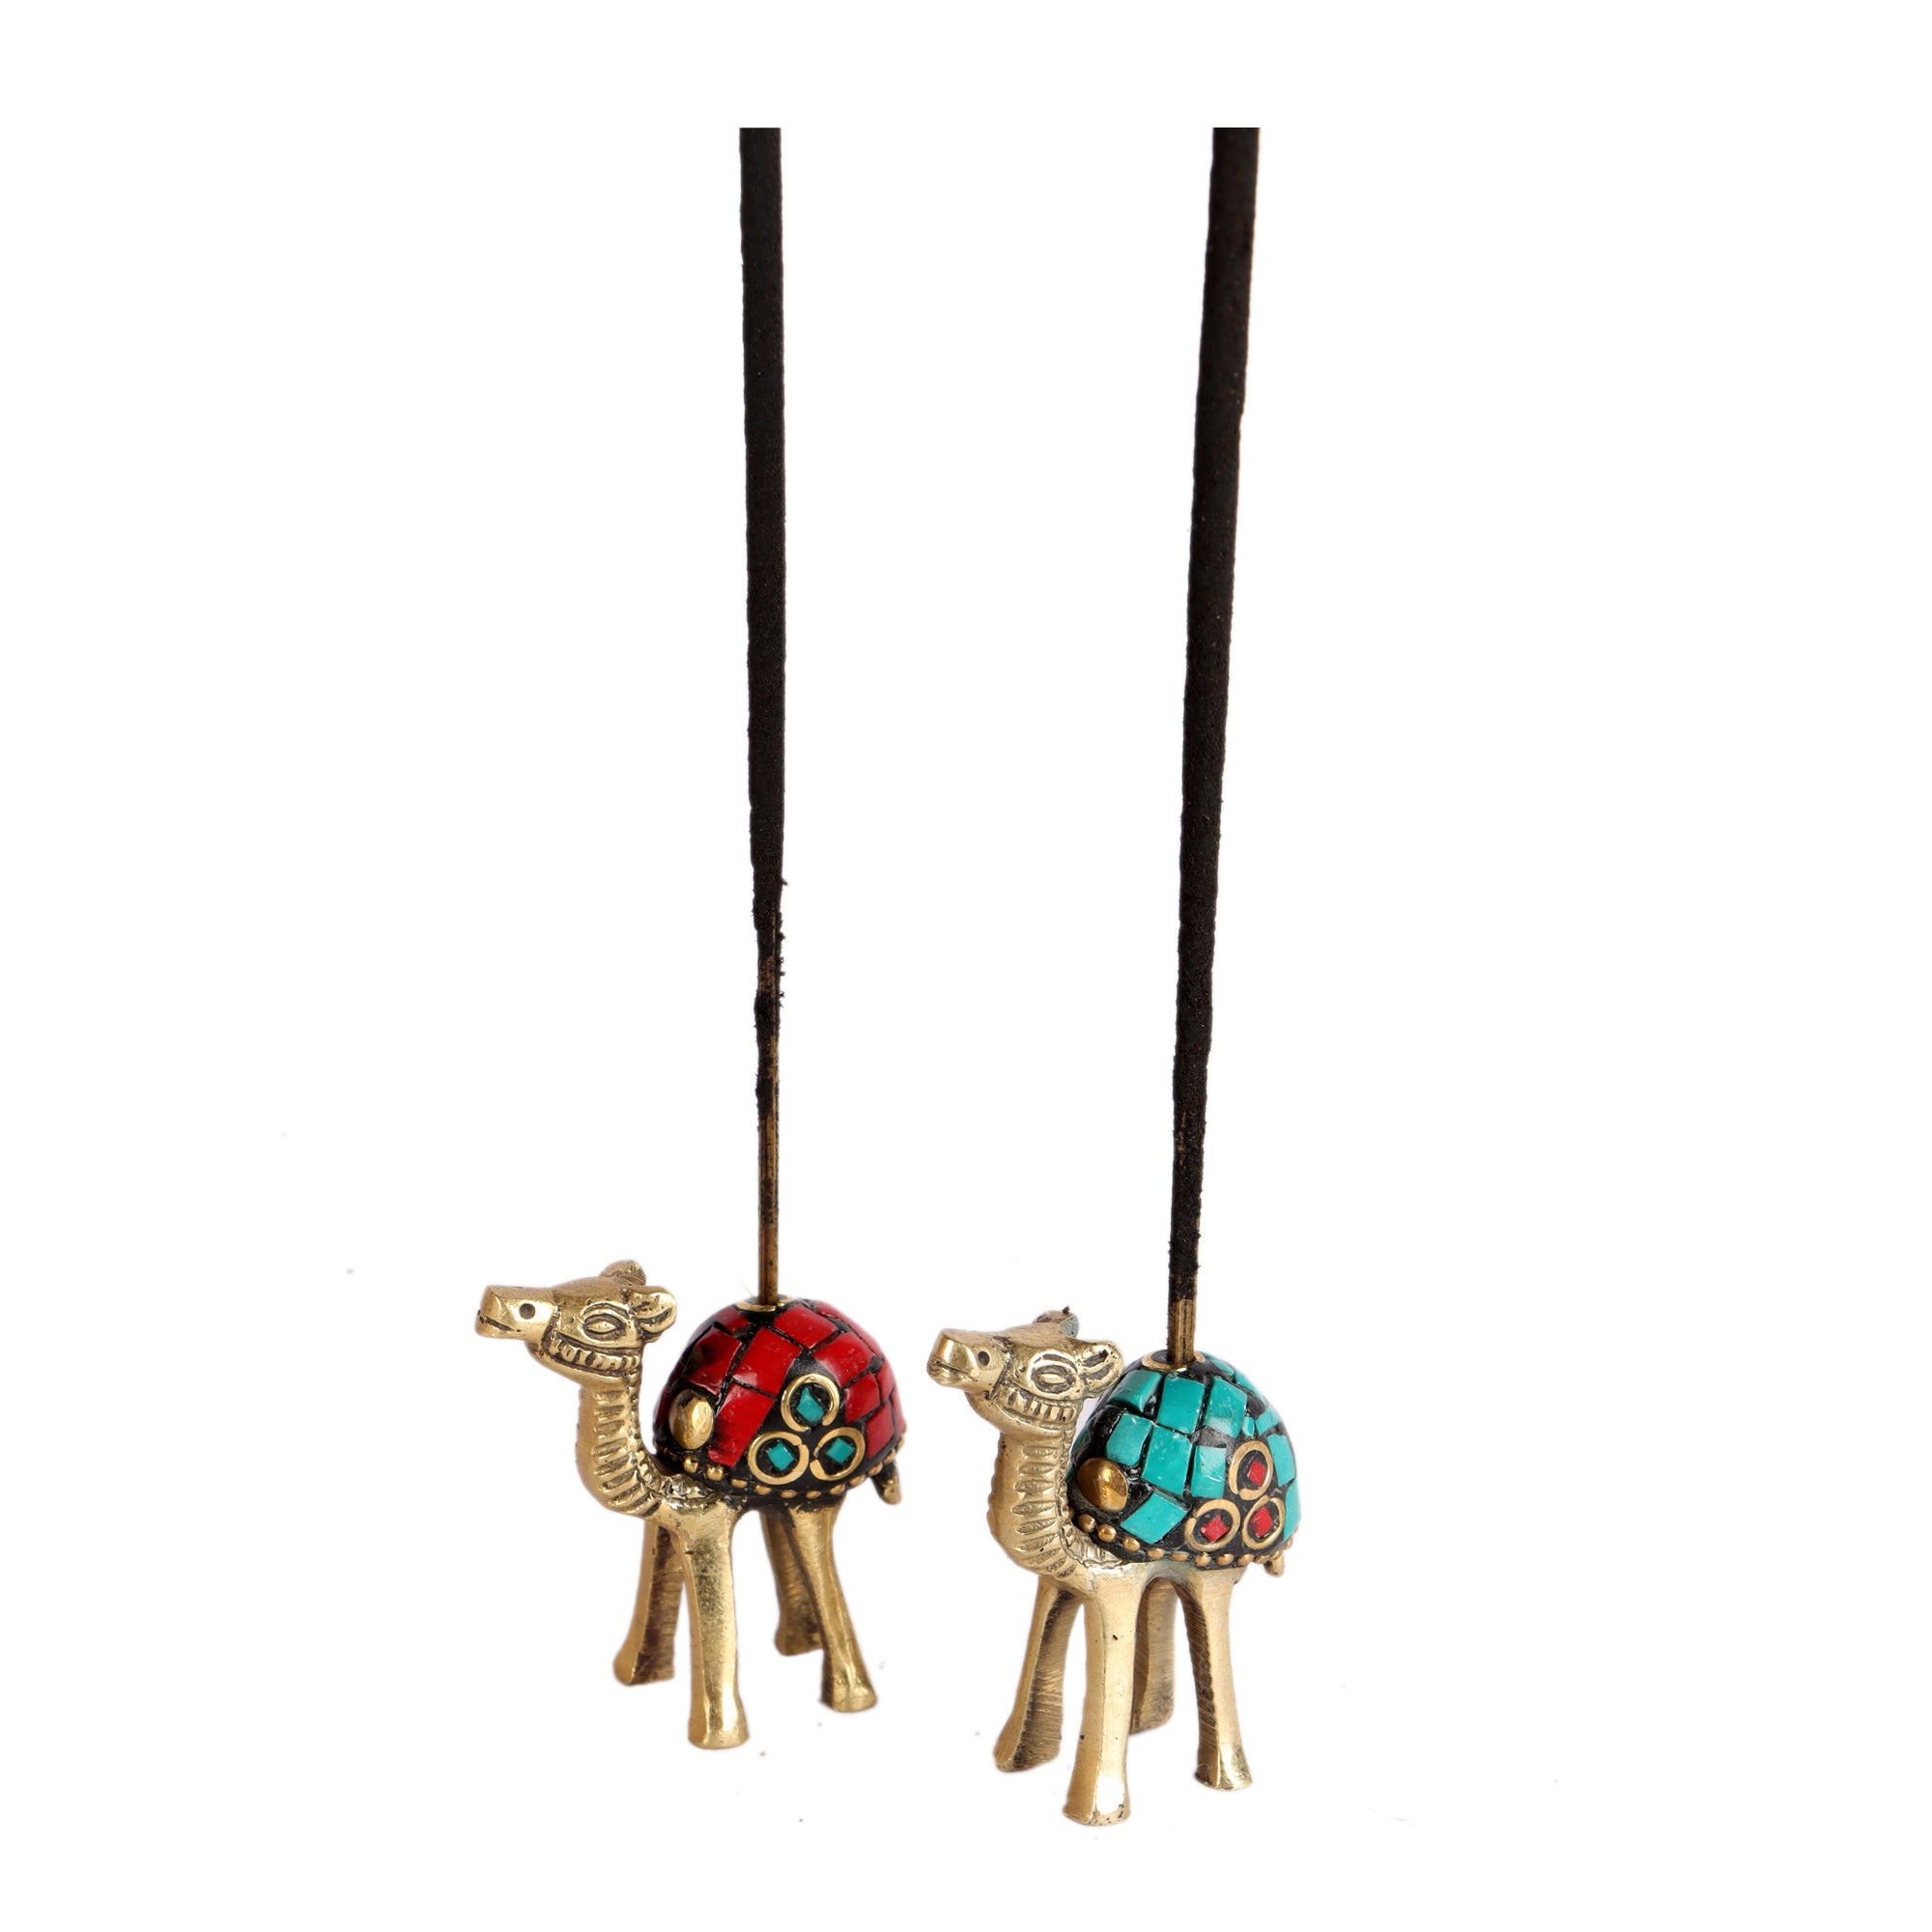 Tiny Camels - Incense Holders (set of 2)